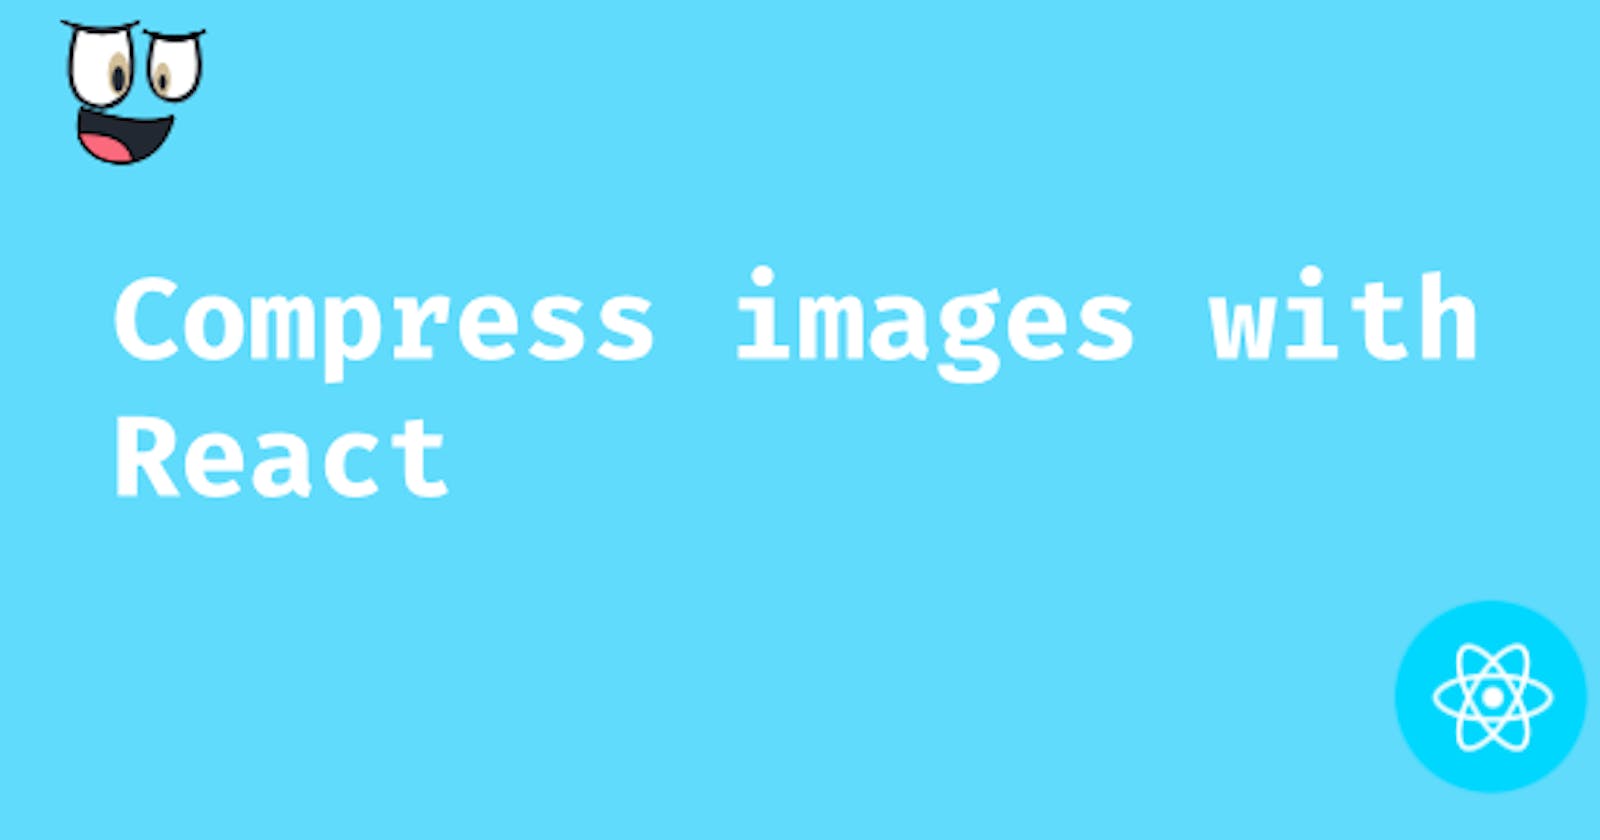 Compress images in React: Browser Image Compression Libary